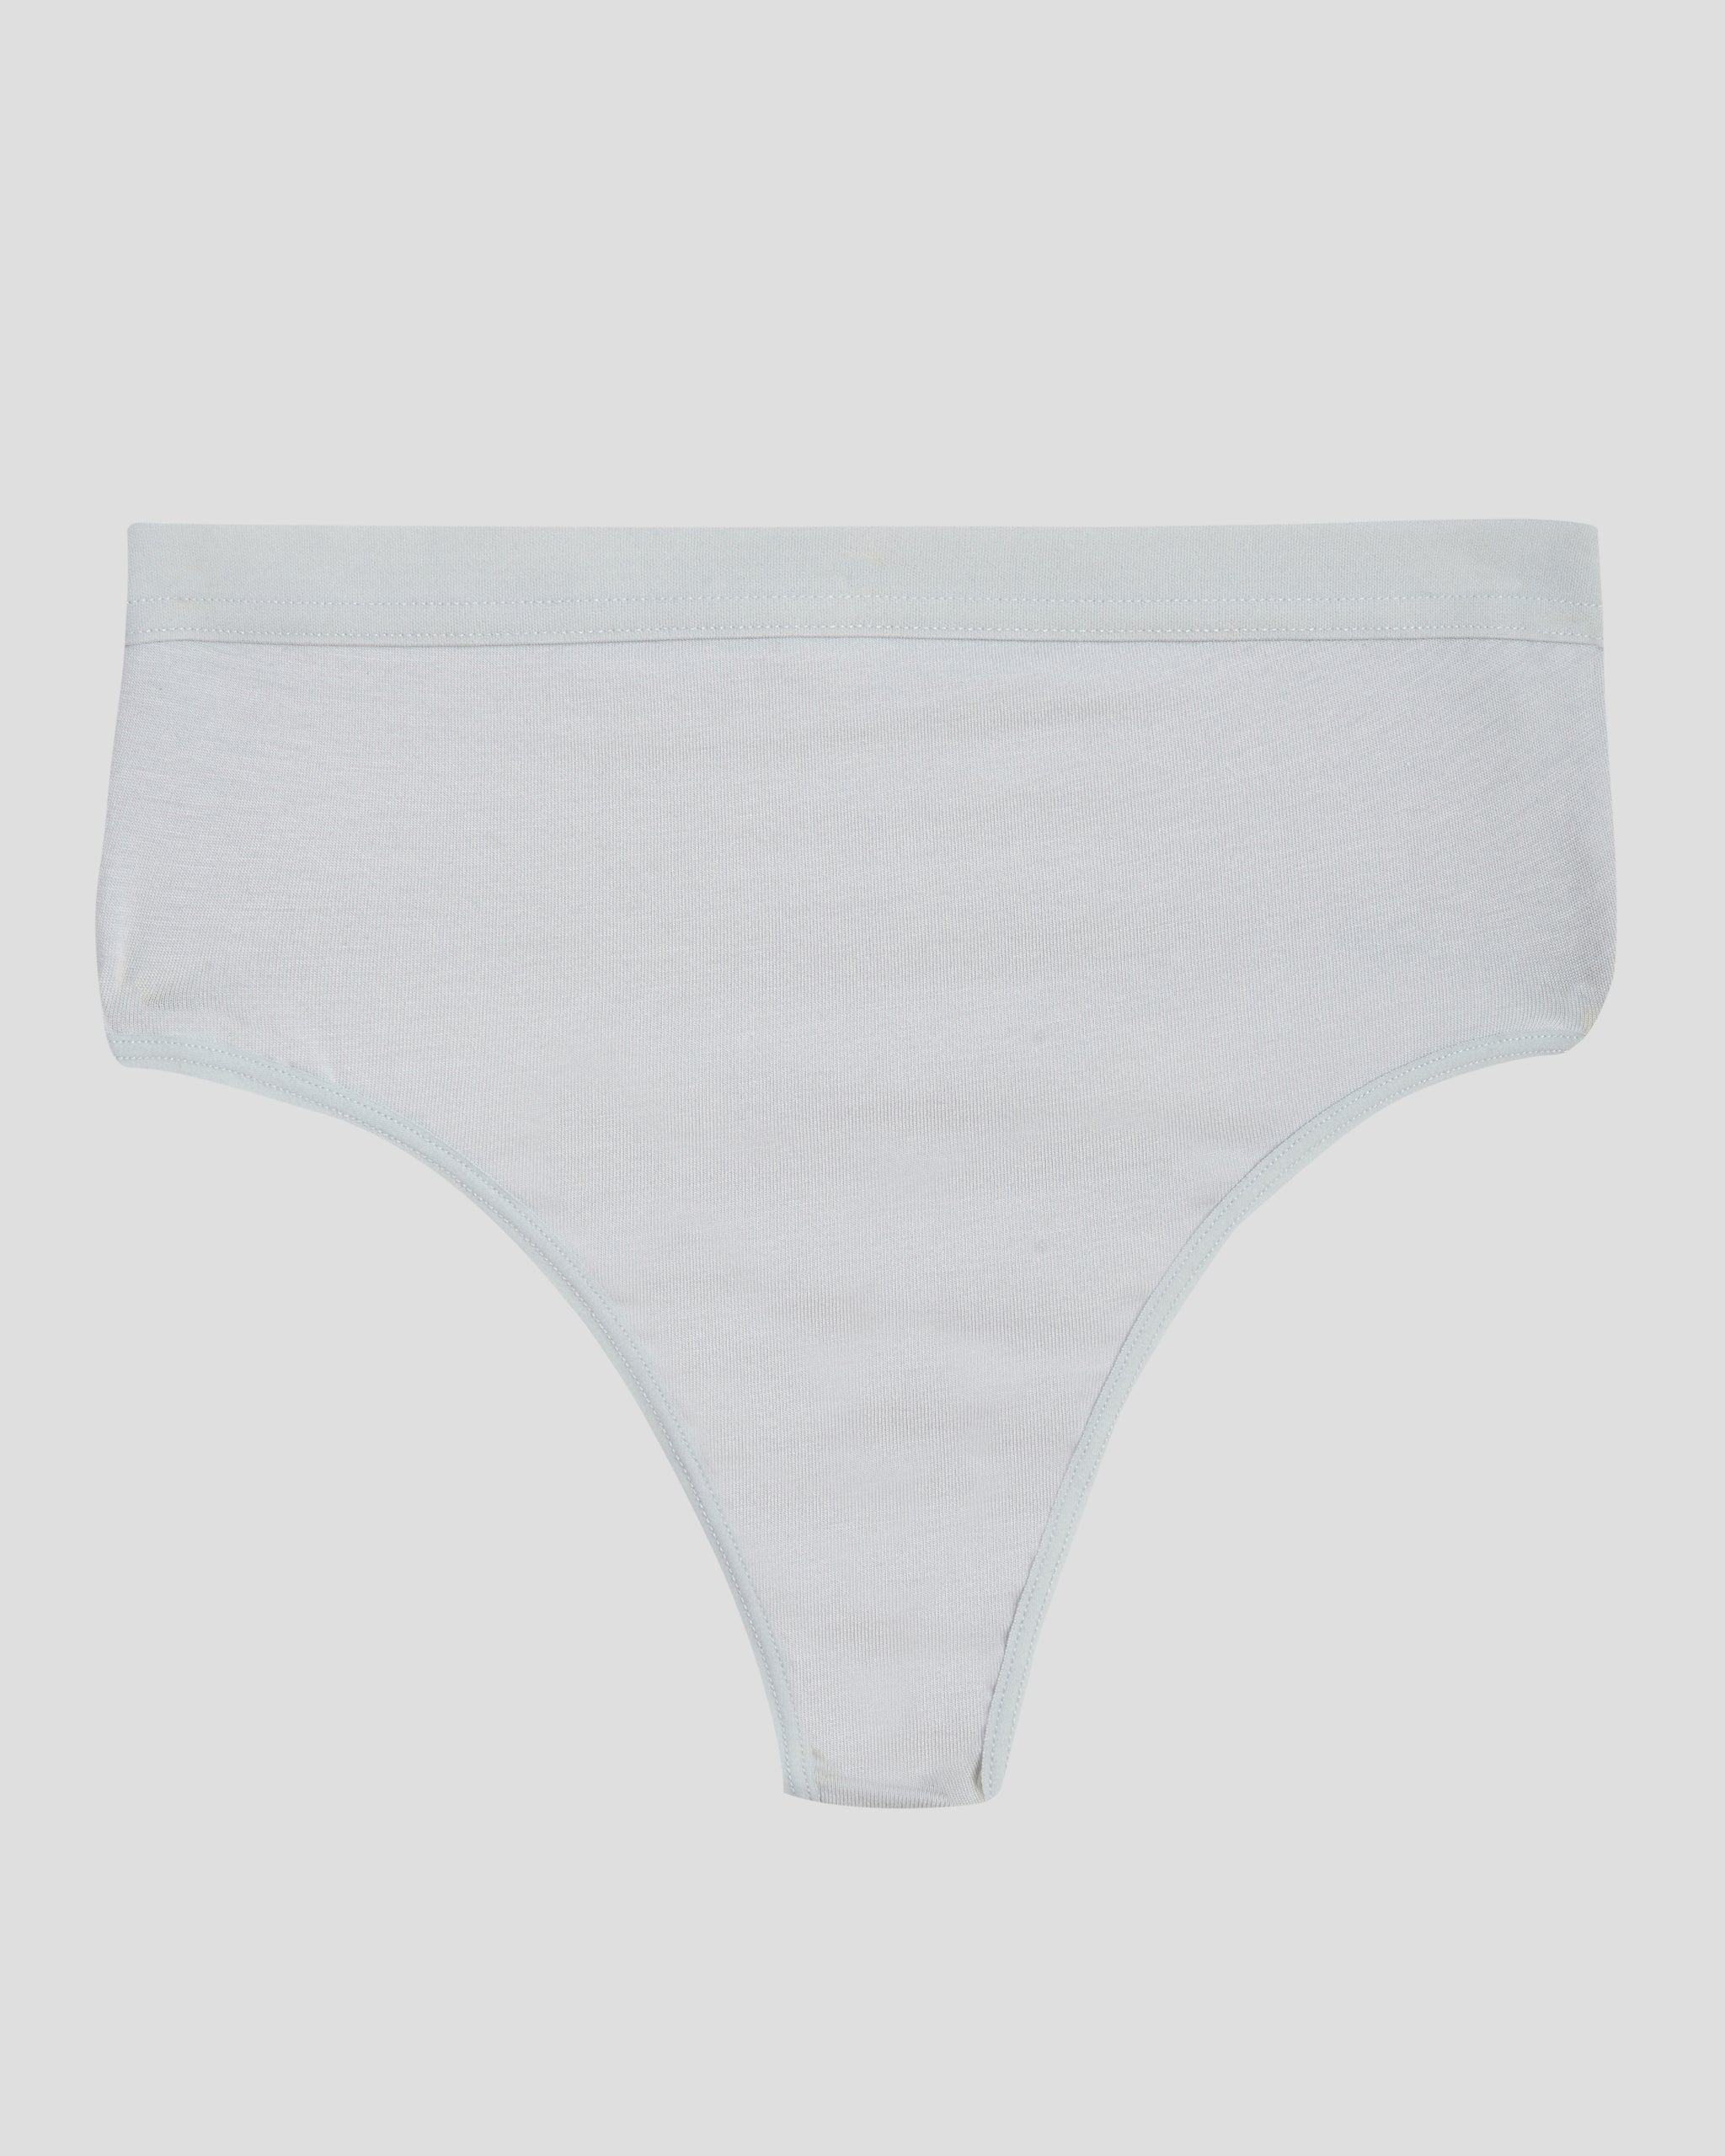 White High Waisted Knickers made in the UK - What Katie Did